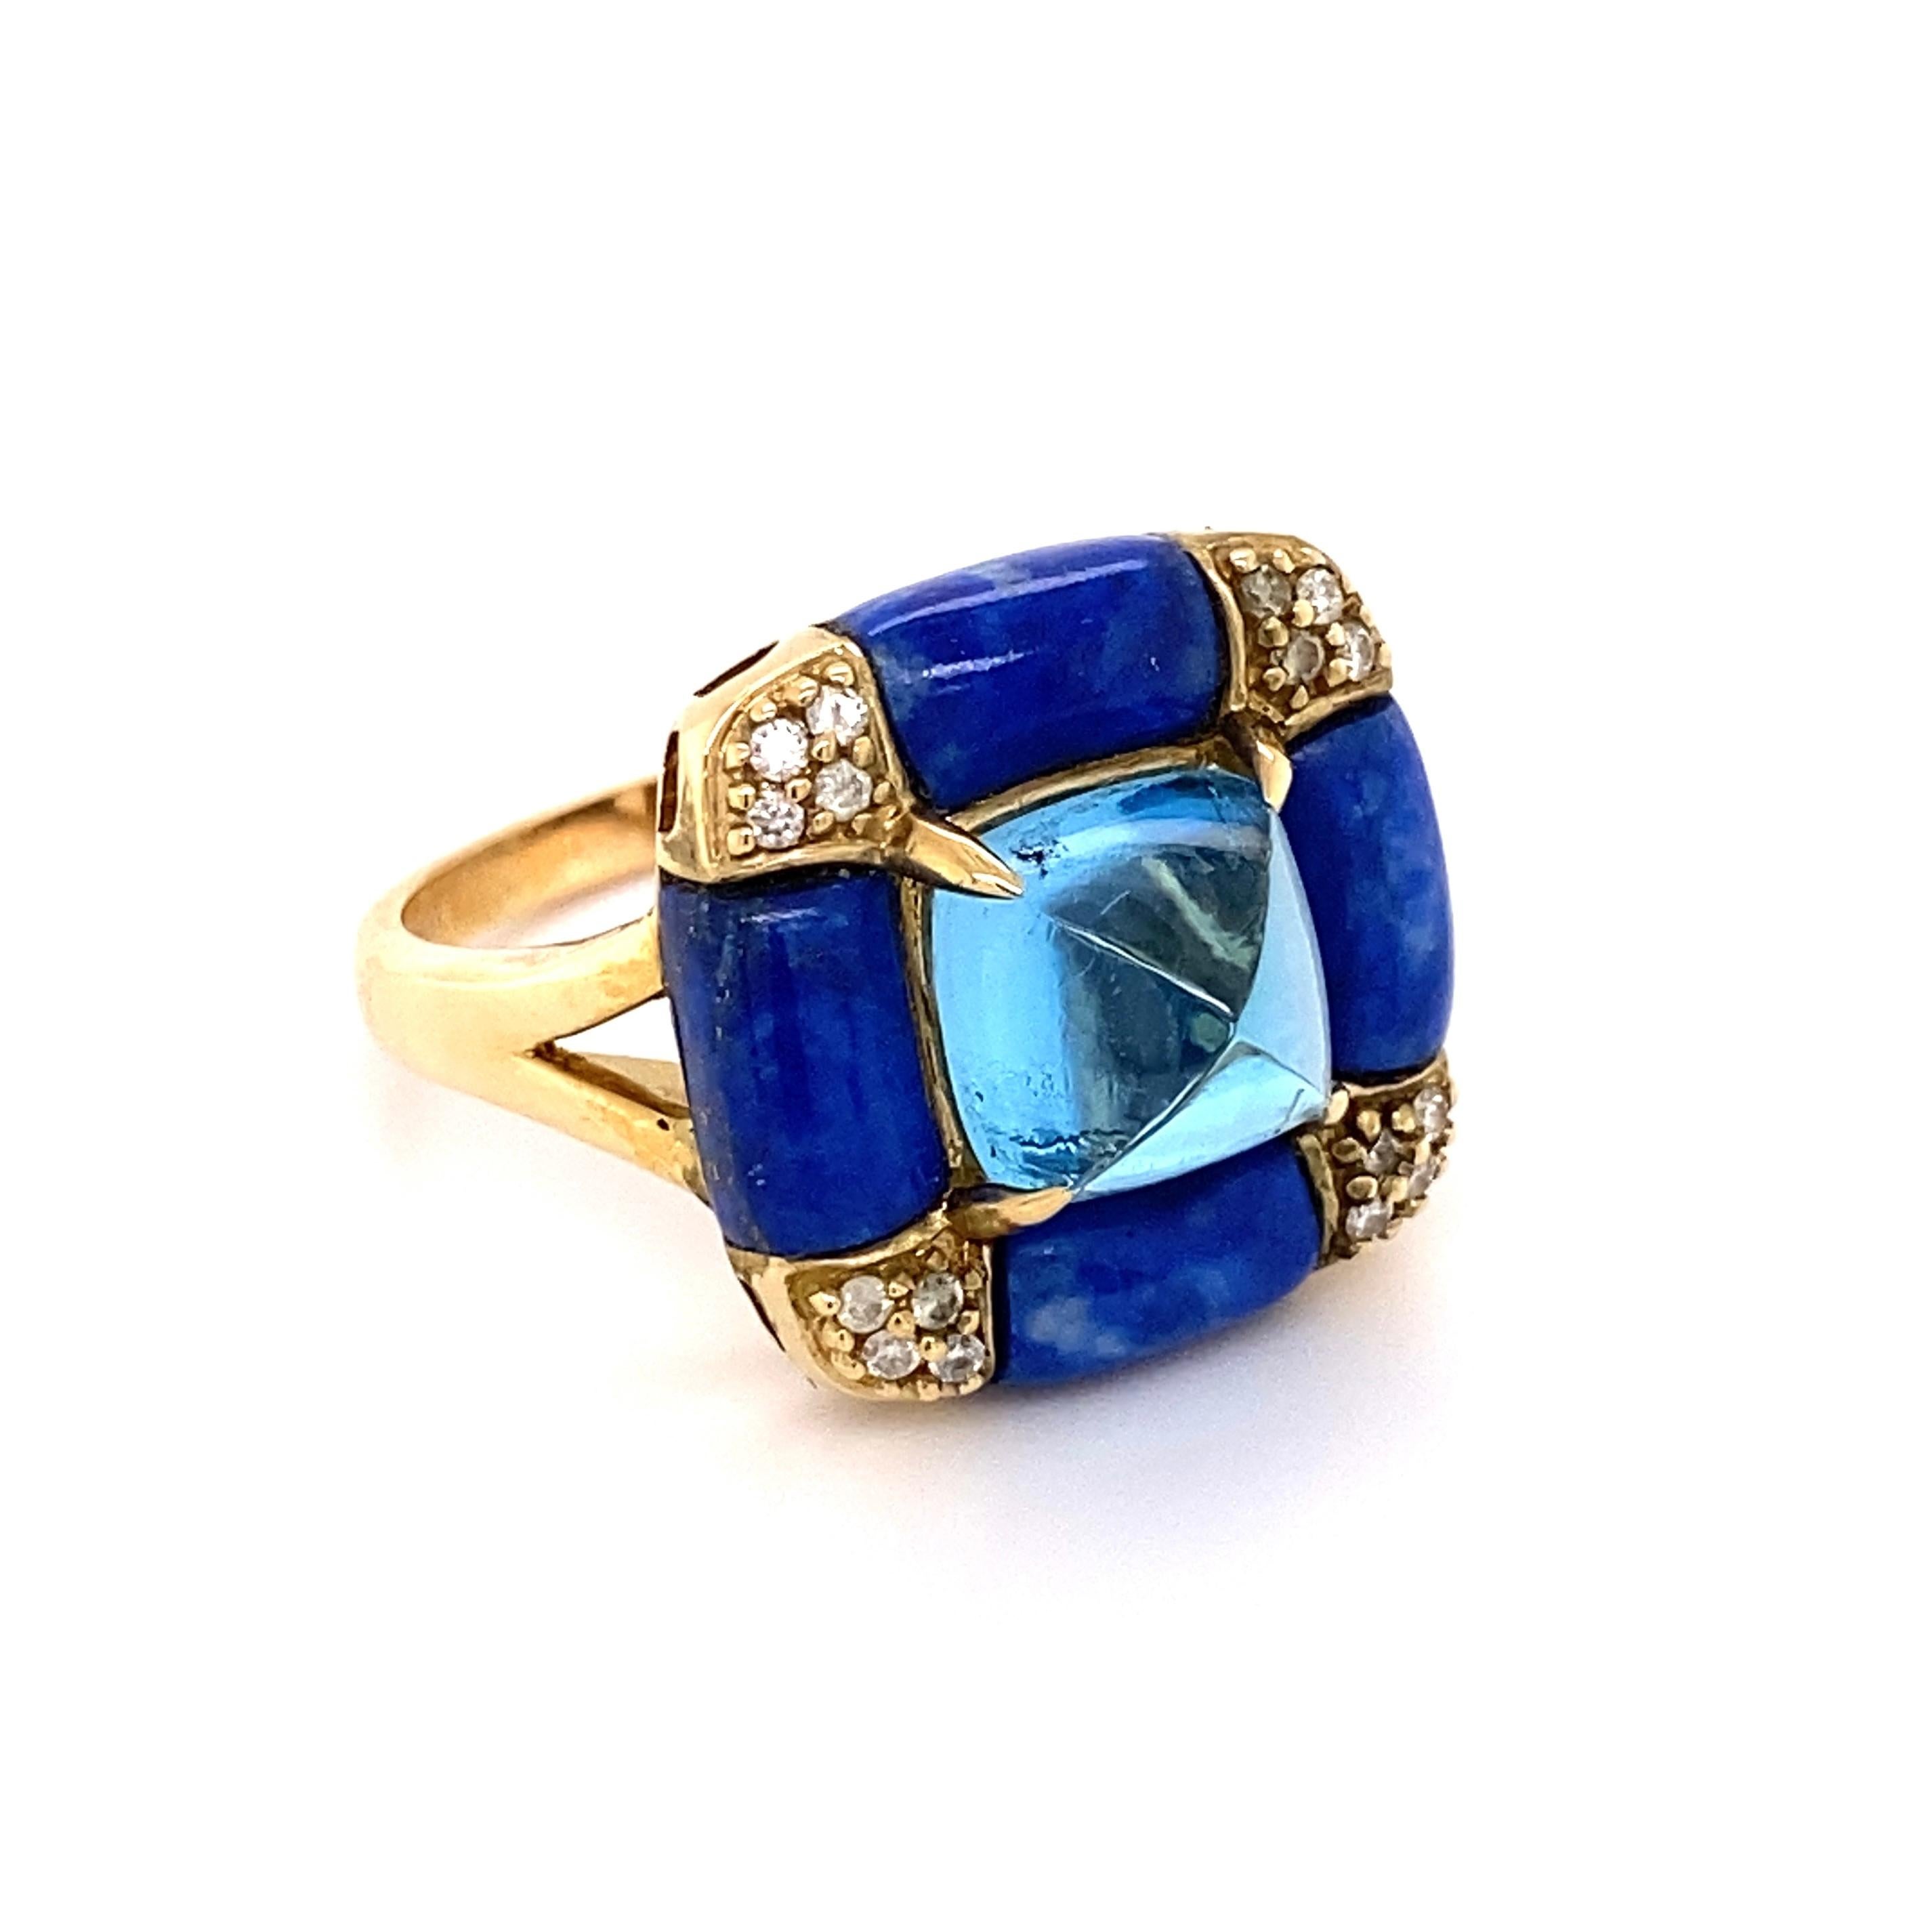 Beautiful Art Deco style Cocktail Ring, centering a securely nestled Sugarloaf Blue Topaz weighing approx. 5.38 Carats surrounded by Lapis Lazuli, approx. 7.21tcw and Diamonds, approx. 0.10tcw. The ring is Hand crafted in 14K Yellow Gold. Measuring